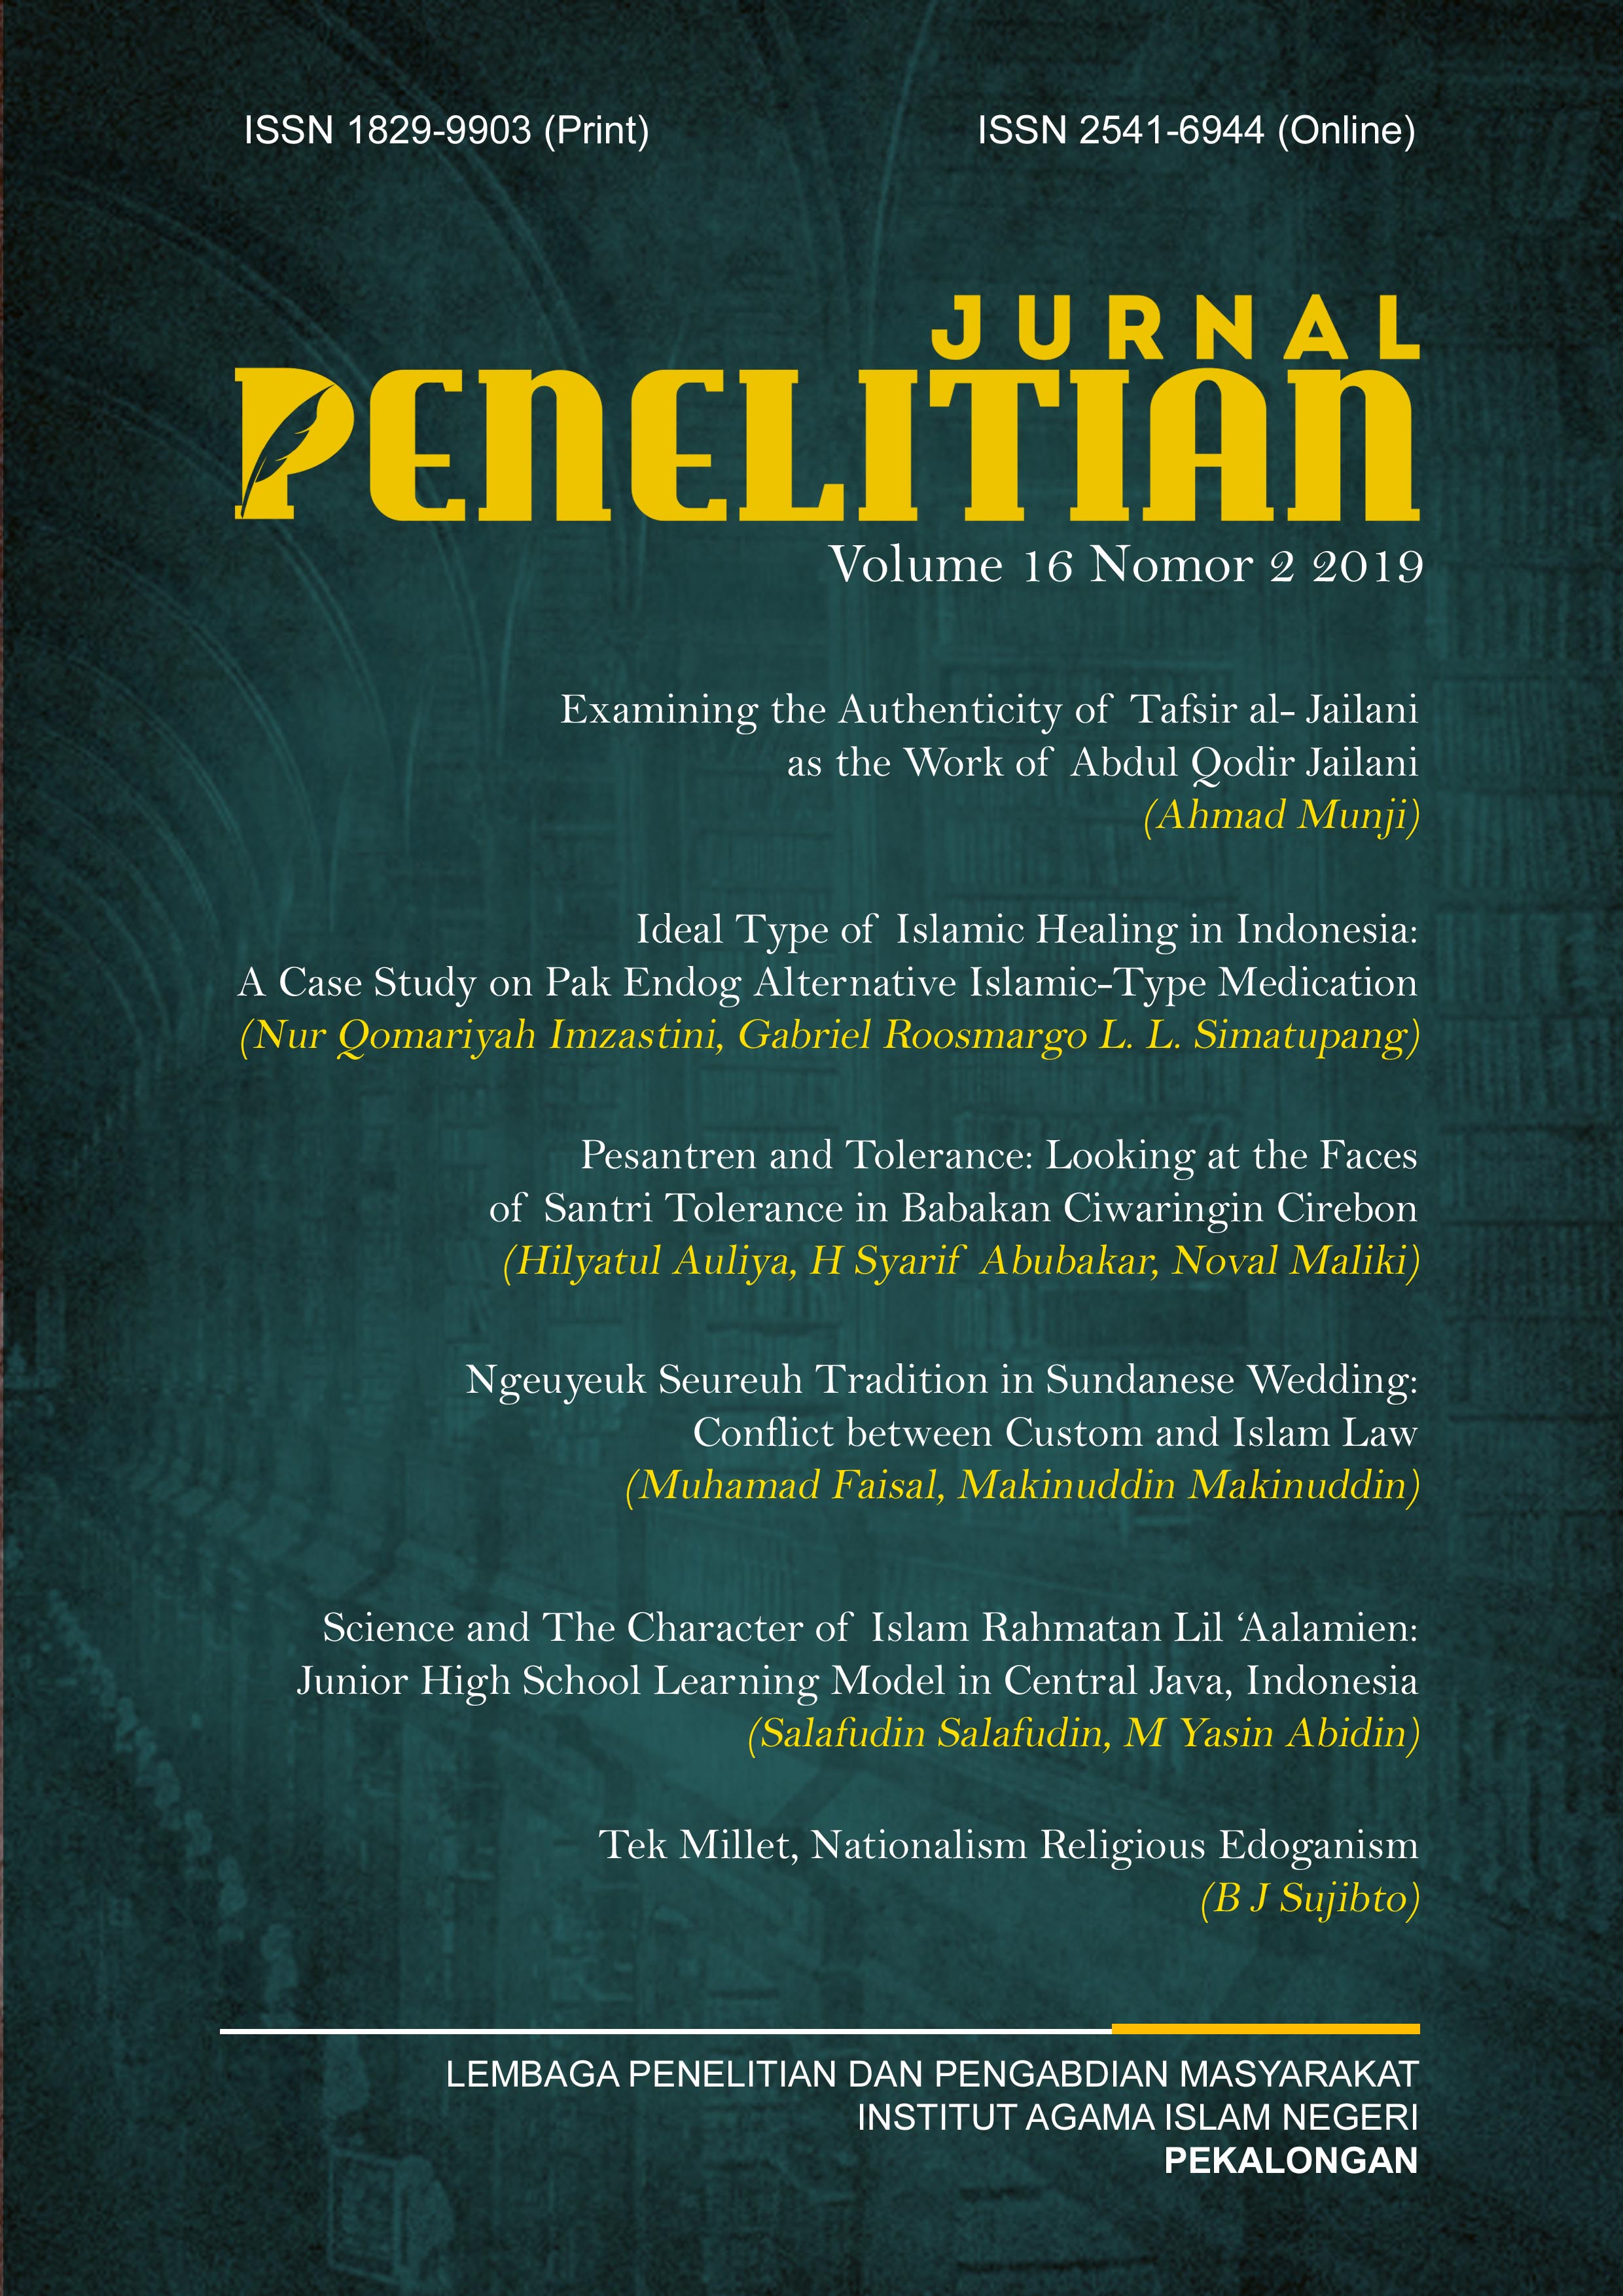 Jurnal Penelitian (ISSN: 1829-9903 and -ISSN: 2541-6944) is a peer-reviewed journal published twice a year by Institute for Research and Community Services (LP2M), The State Islamic Institute (IAIN) Pekalongan, Central Java, Indonesia. This journal is a religious or Islamic studies journal containing (library or field) research results from various aspects of discipline, religion, social, education, law, economy, politics, environment, language, art and culture. We warmly welcome contributions from scholars and researchers of many disciplines.  All submitted manuscripts are subject to double-blind review process. This journal is an open access journal. Users are allowed to read, download, copy, distribute, print, search, or link to the full texts of the articles, or use them for any other lawful purpose, without asking prior permission from the publisher or the author. Jurnal Penelitian has been accredited grade 2 (Sinta 2) by The Ministry of Research, Technology, and Higher Education, Republic of Indonesia as an academic journal. Jurnal Penelitian has become a CrossRef Member since the year 2017. Therefore, all articles published by Jurnal Penelitian will have unique DOI number.